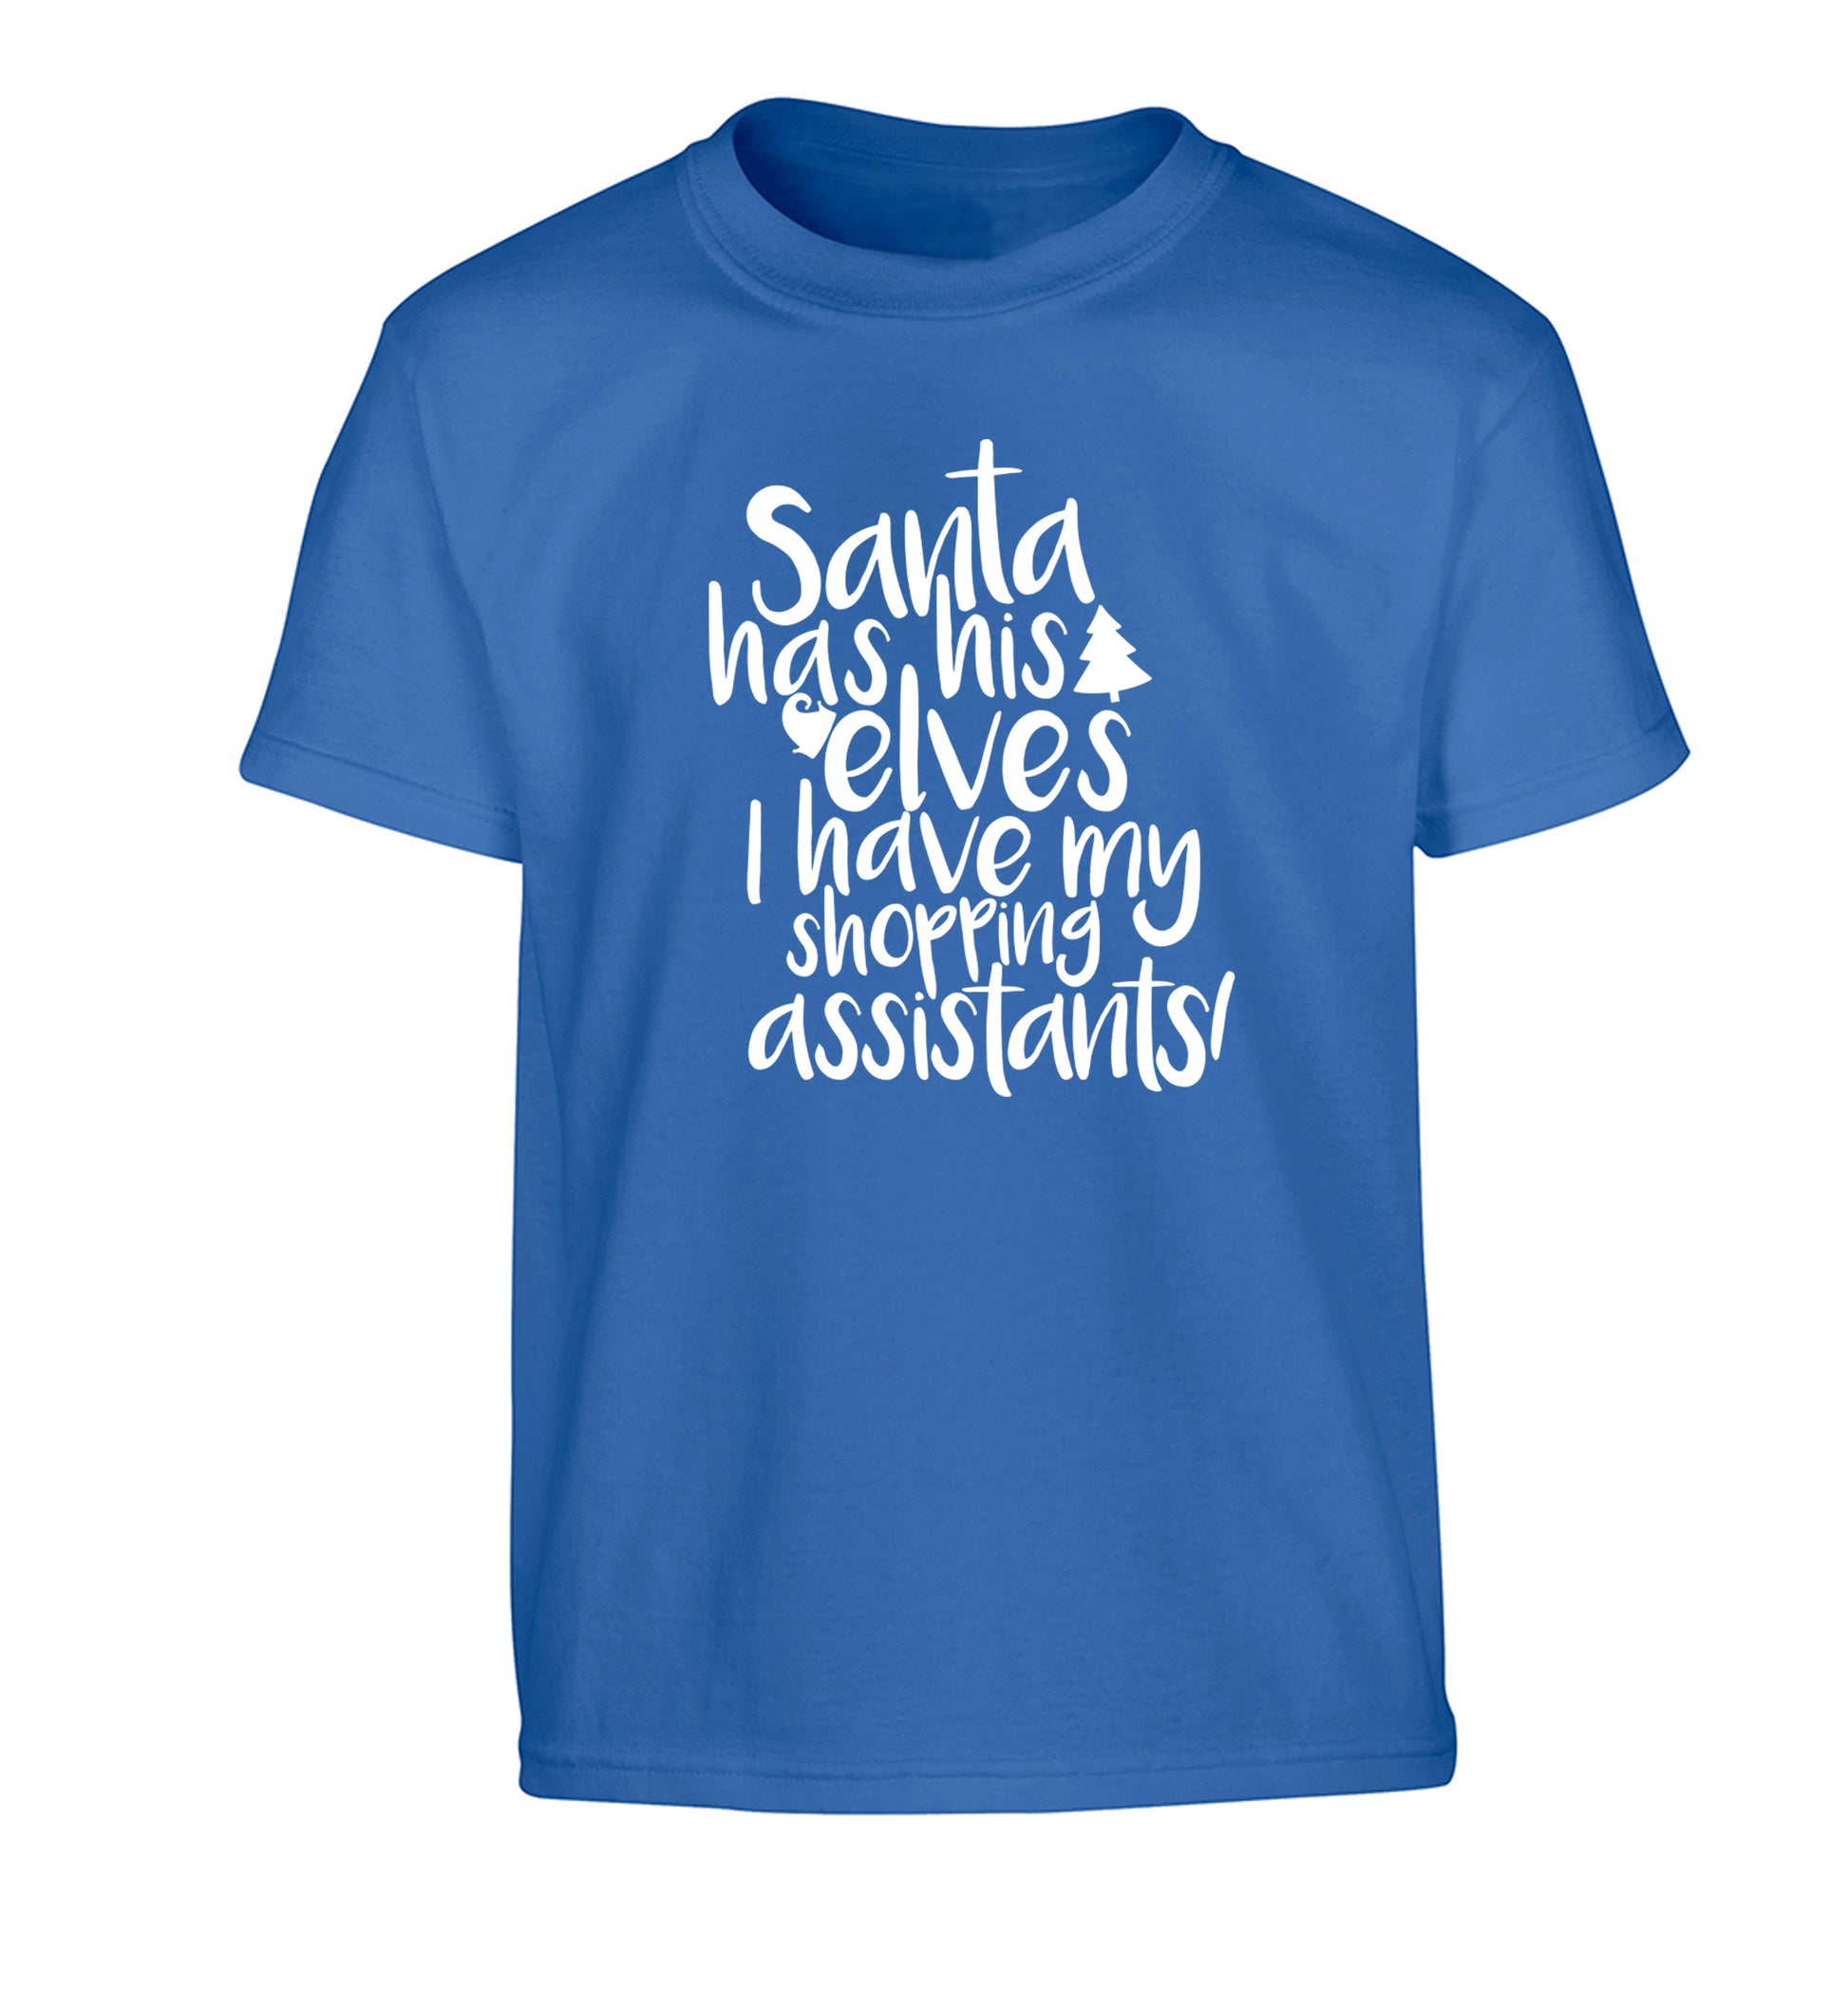 Santa has his elves I have my shopping assistant Children's blue Tshirt 12-14 Years